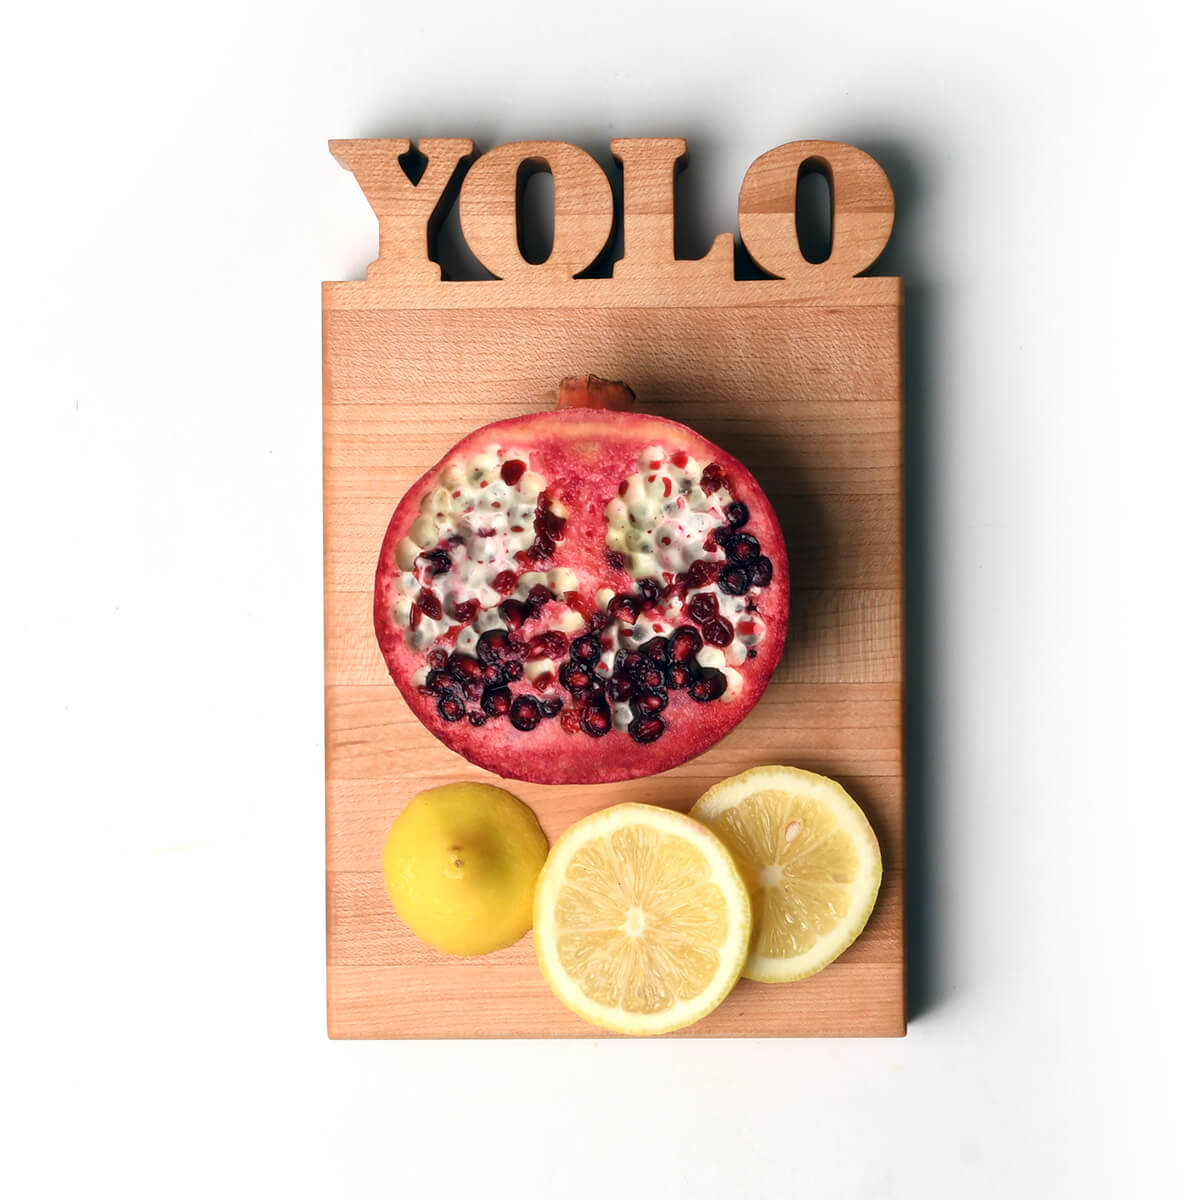 mini cutting board with the letters YOLO cut out, pomegranate and lemons shown on board